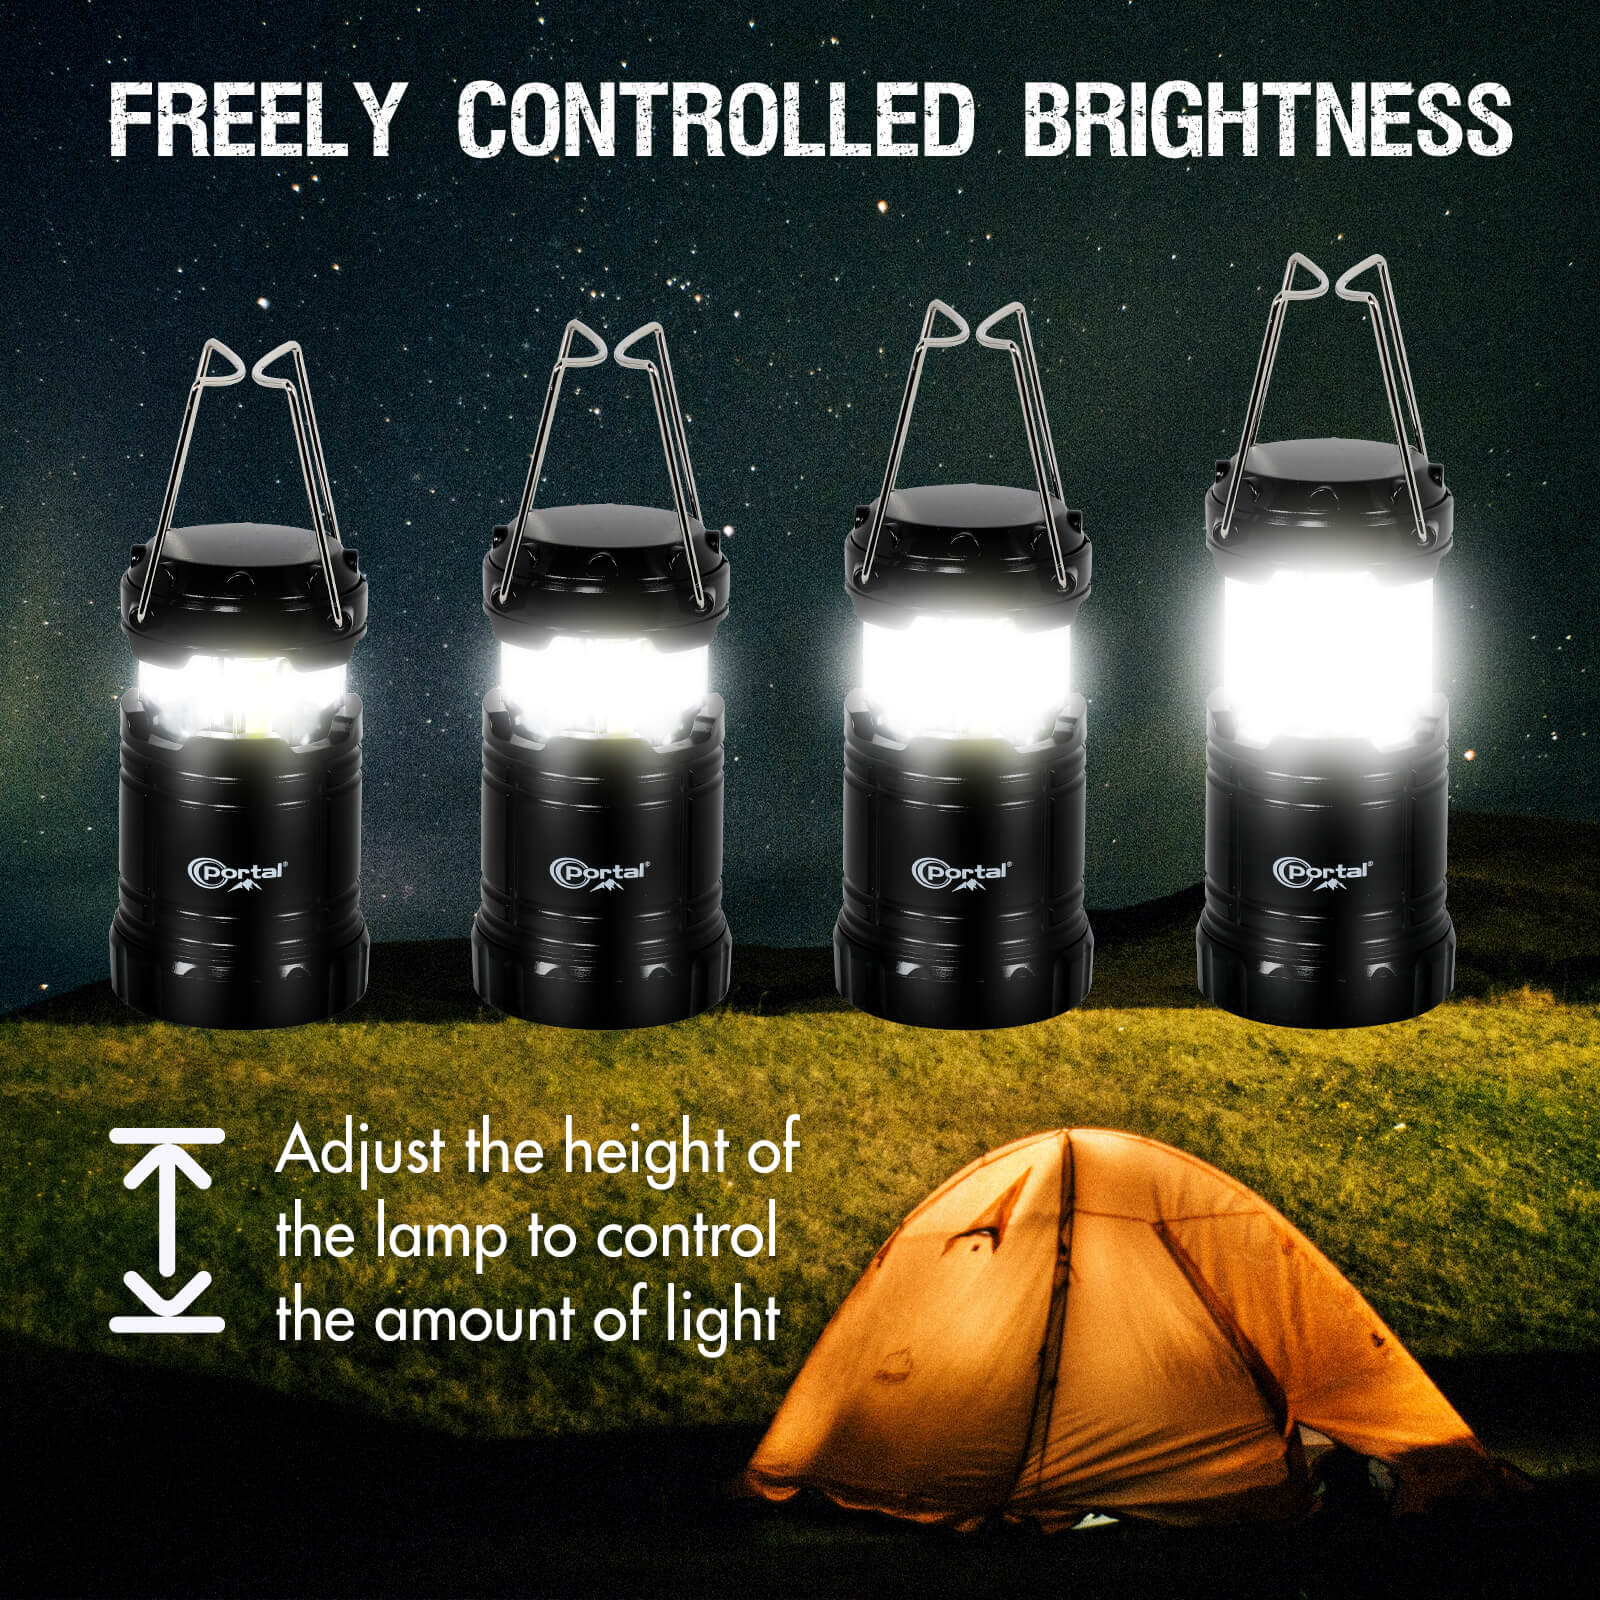 Camping Lantern Super Bright, Costech Latest COB Technology (350 Lumen)  Portable Outdoor Lights, Hanging Flashlight Camping Gear Equipment with